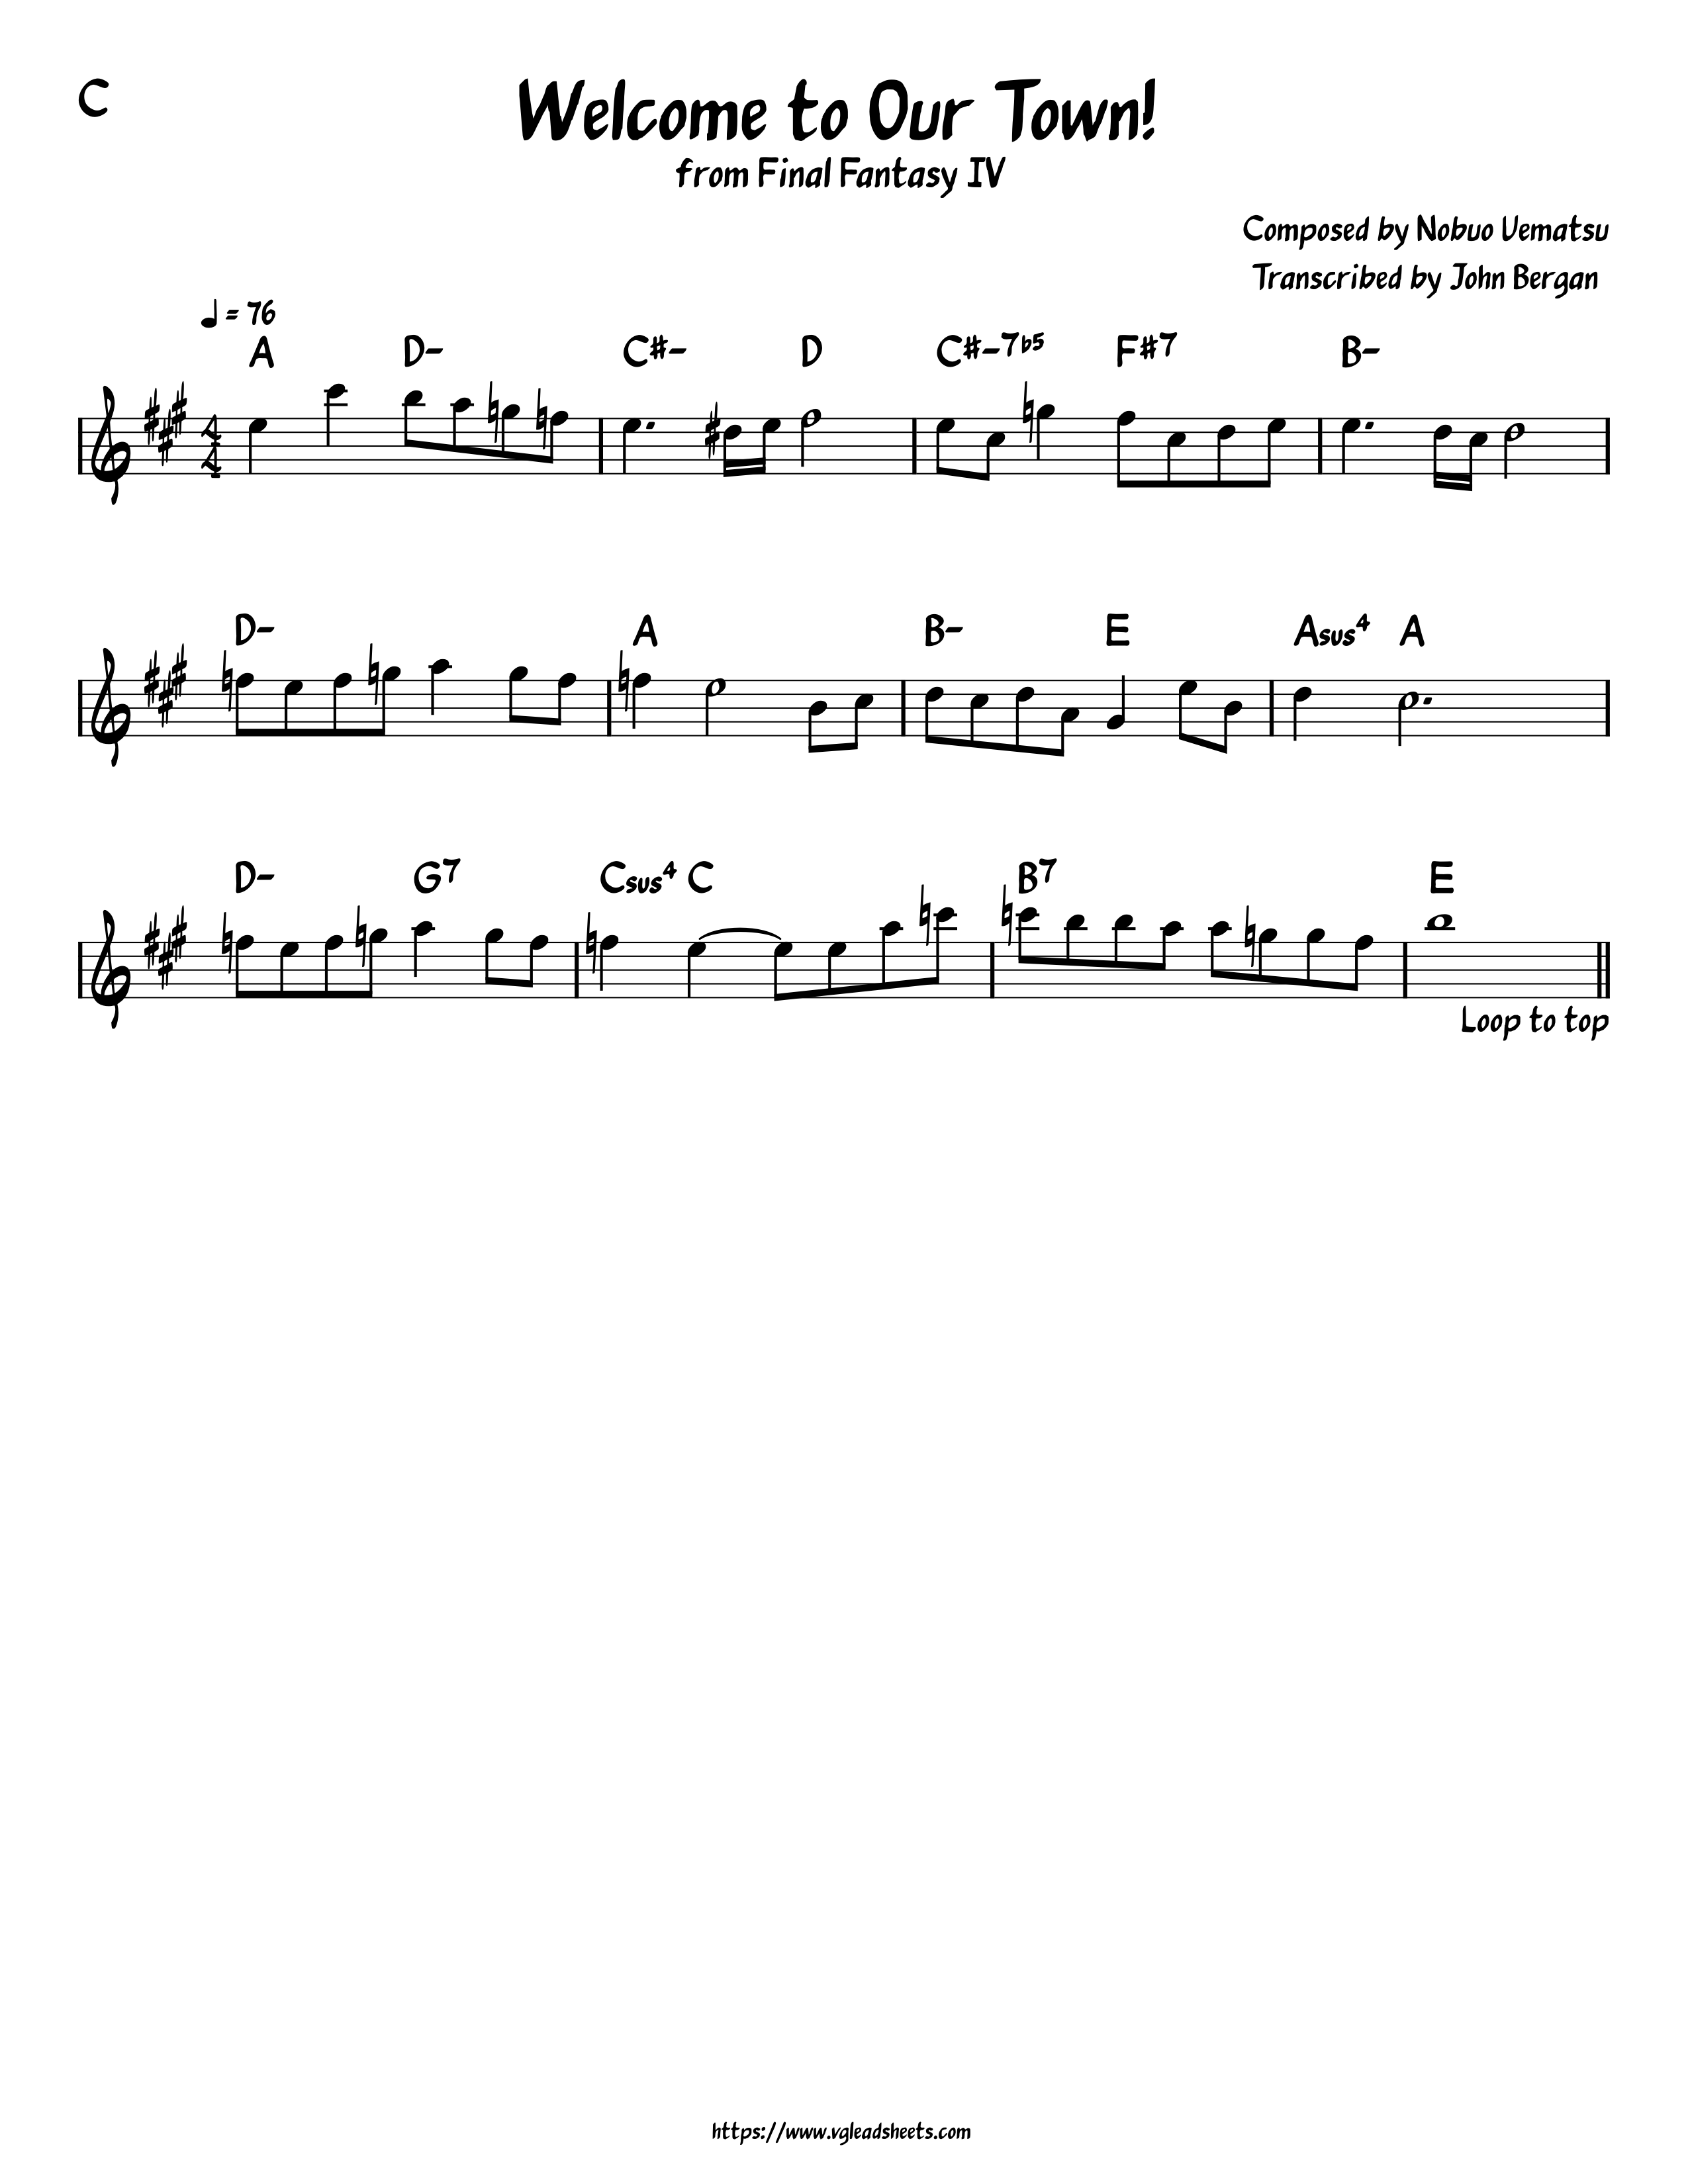 🚨If you want sheet music check my recently posted! I have it for all , driftveil city